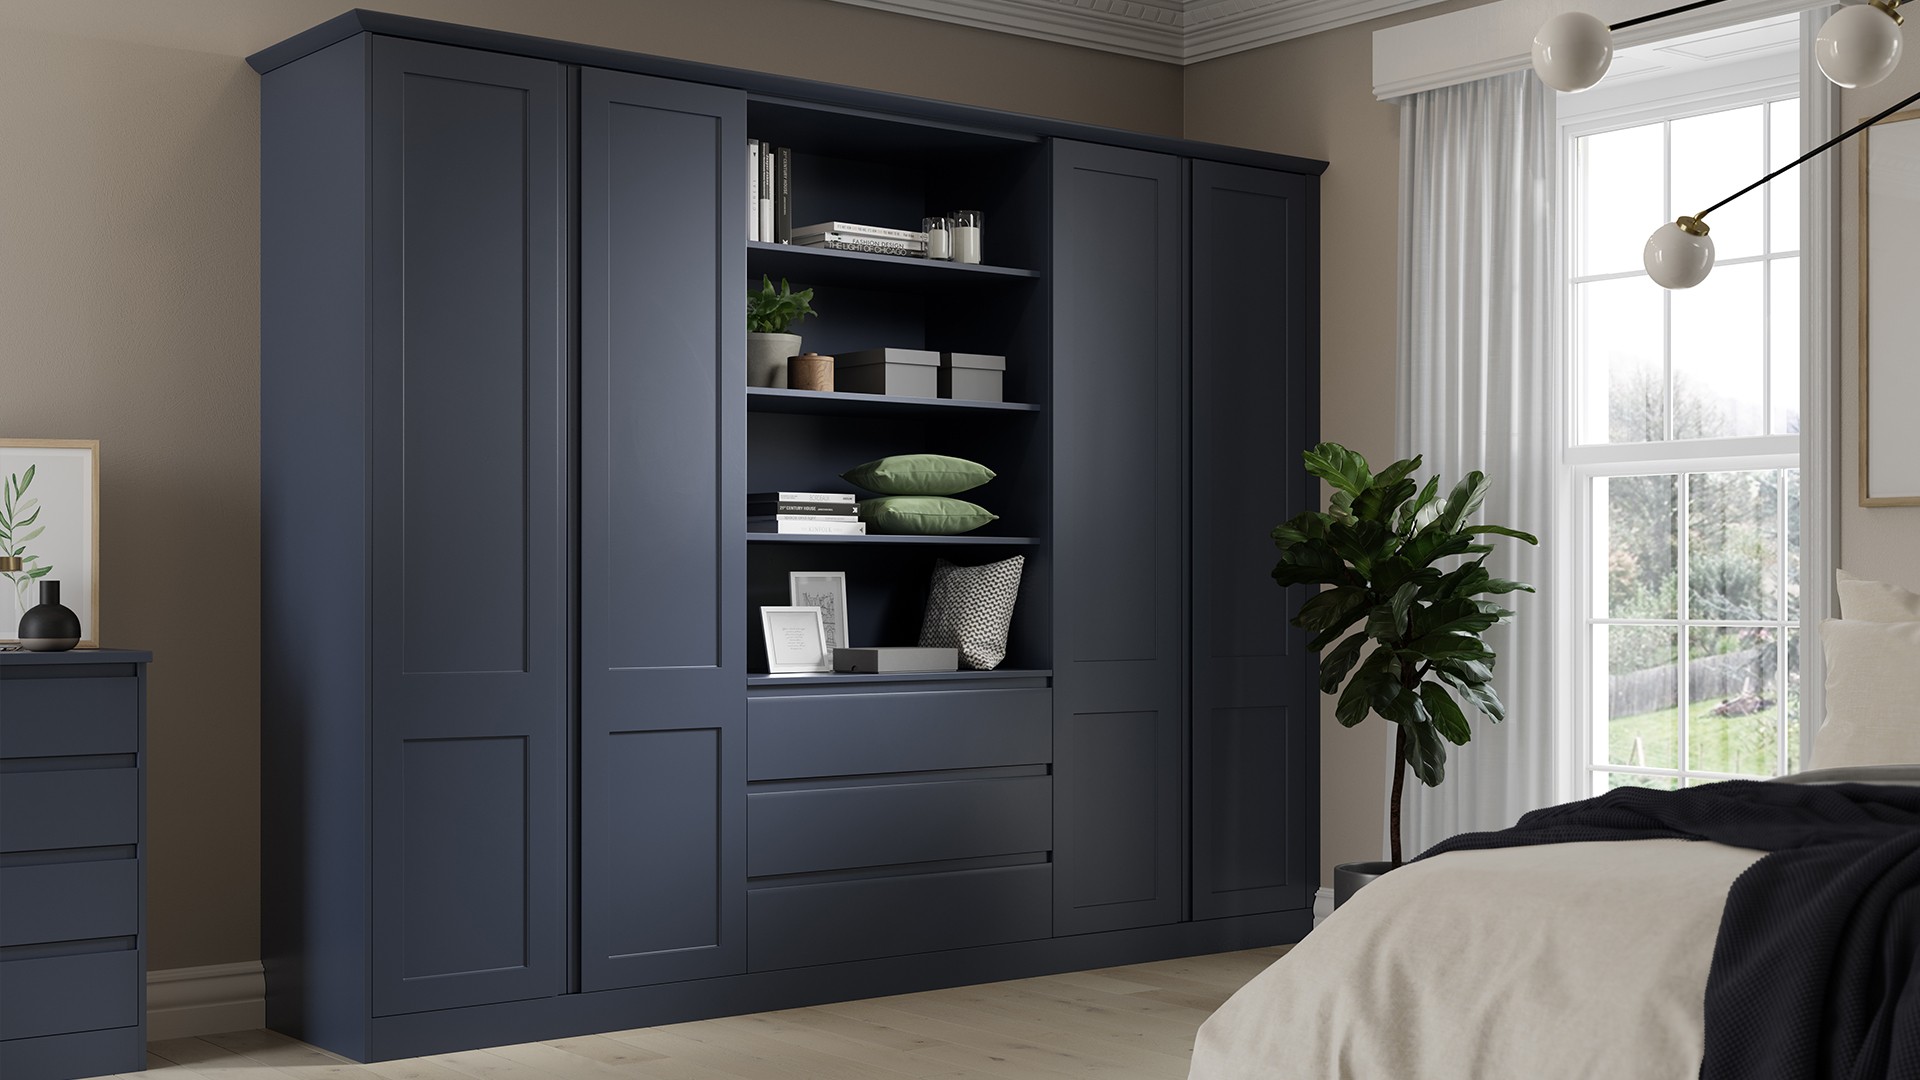 Custom size doors in a wide range of colours and styles